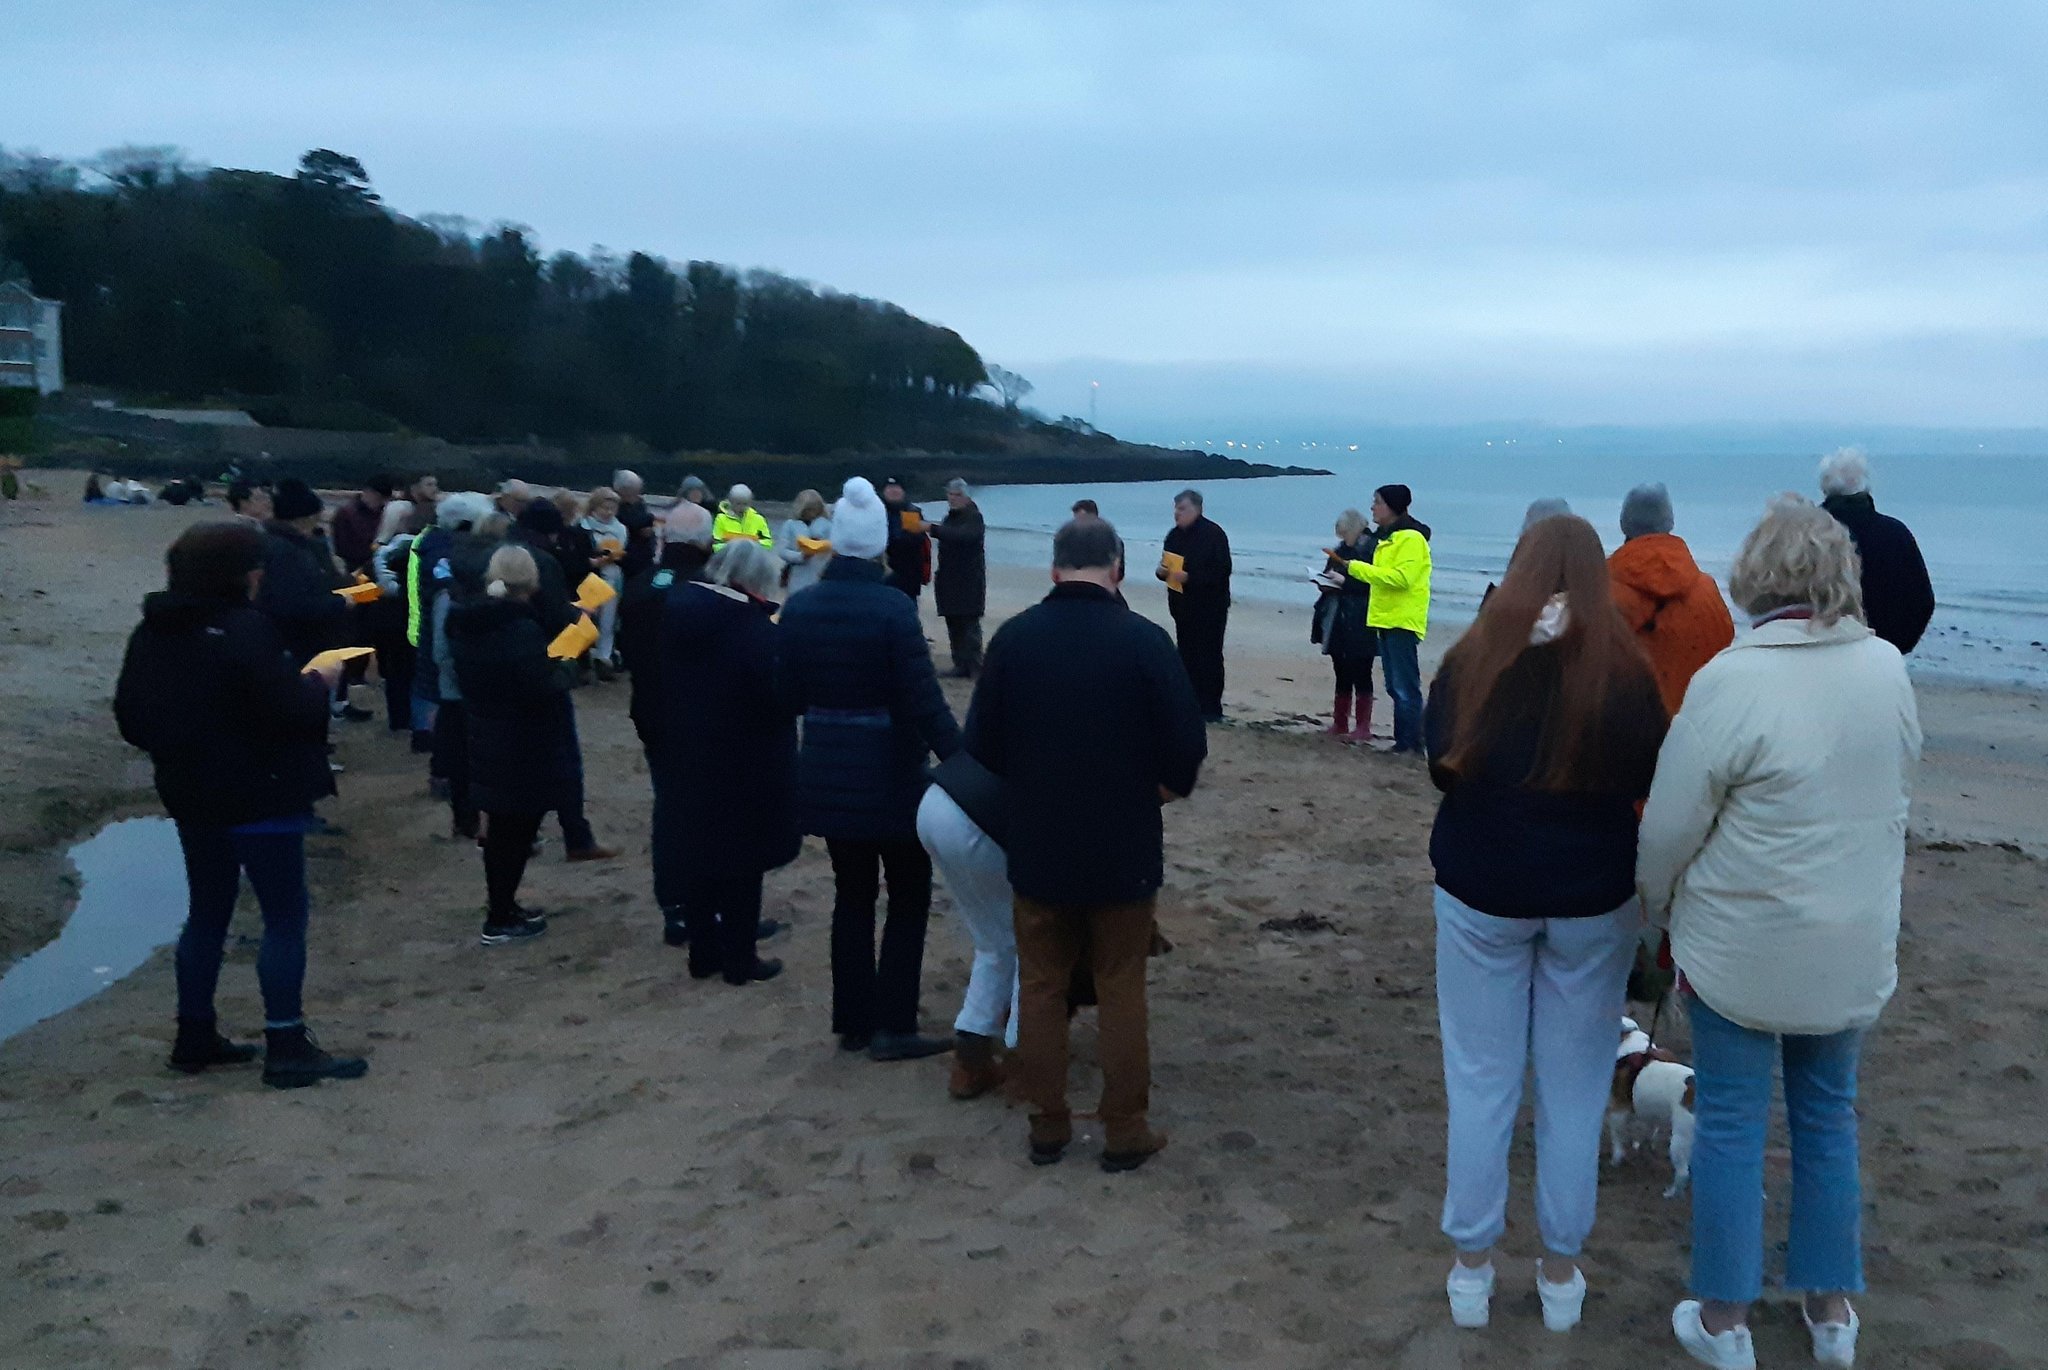 Dawn services are held across Northern Ireland to mark Easter Sunday